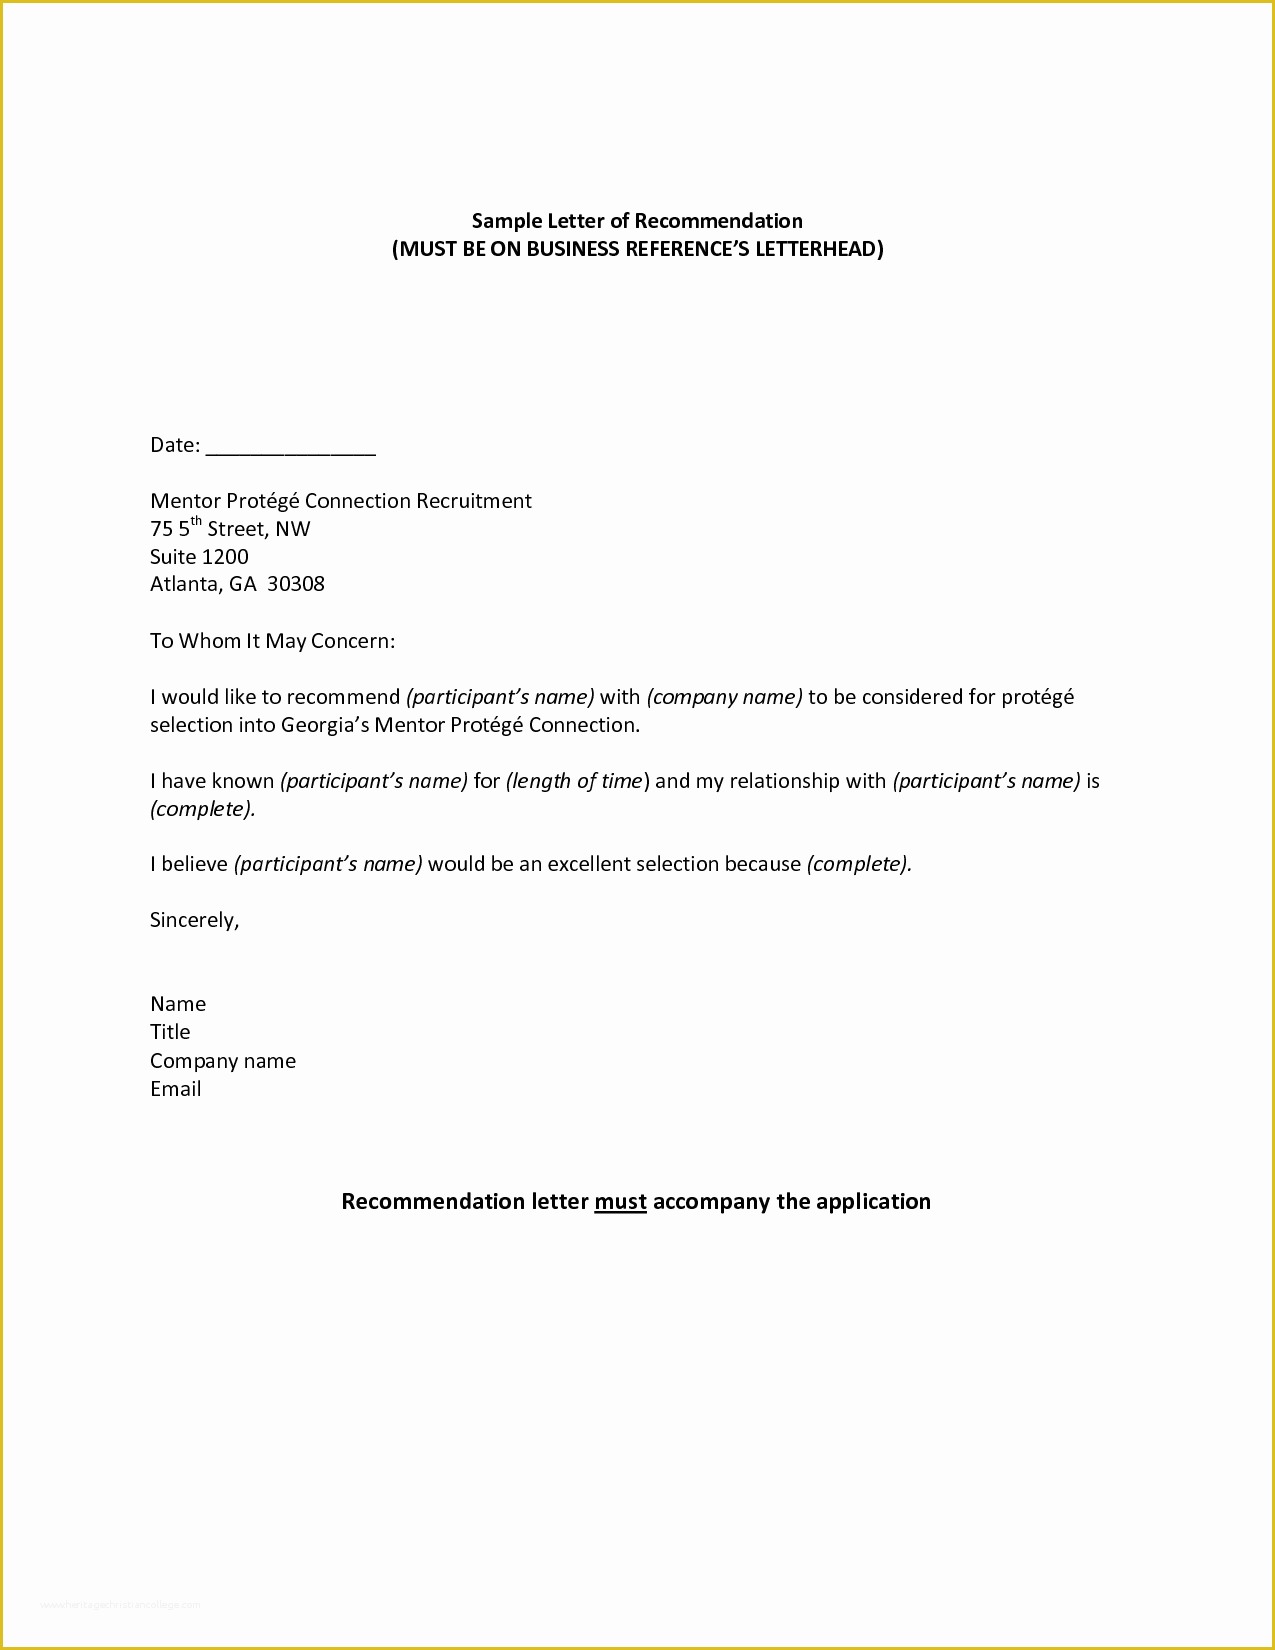 Reference Letter Template Free Of Professional Reference Sample Re Mendation Letter Jos